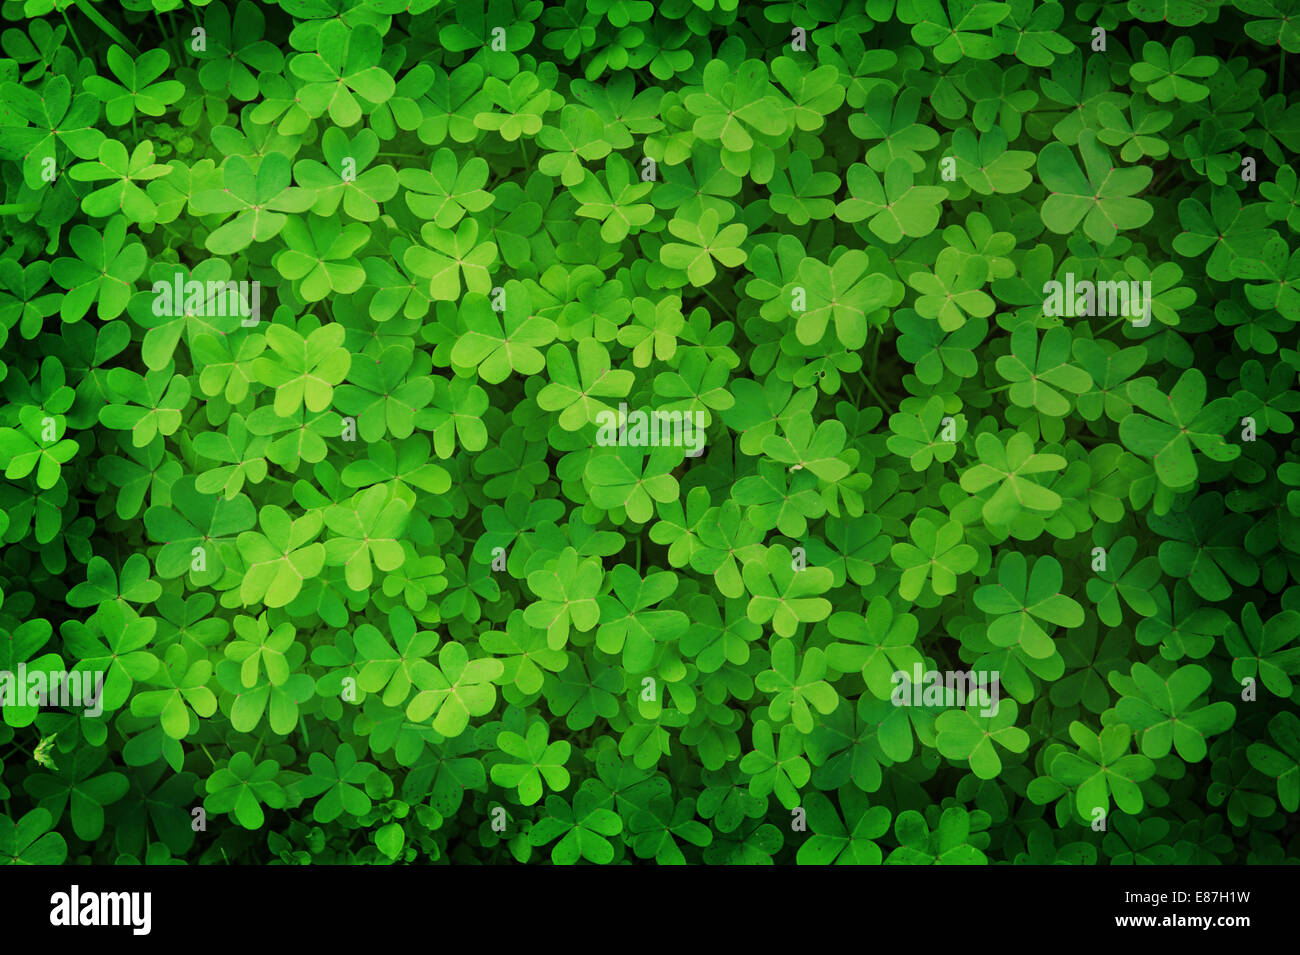 green clover background in vintage style Stock Photo